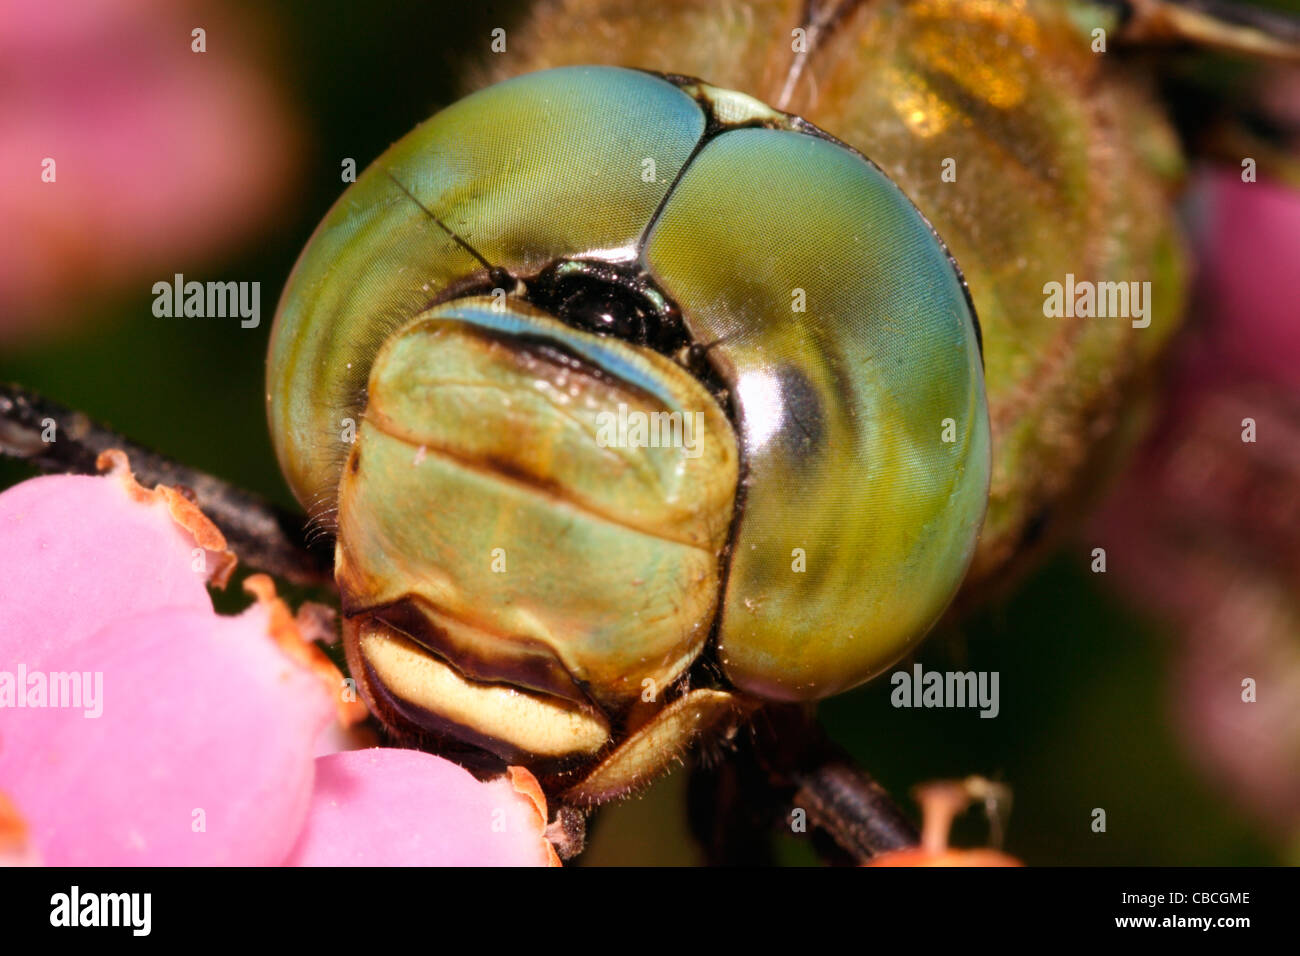 Emperor dragonfly (Anax imperator) male showing large compound eyes meeting on top of the head, UK. Stock Photo